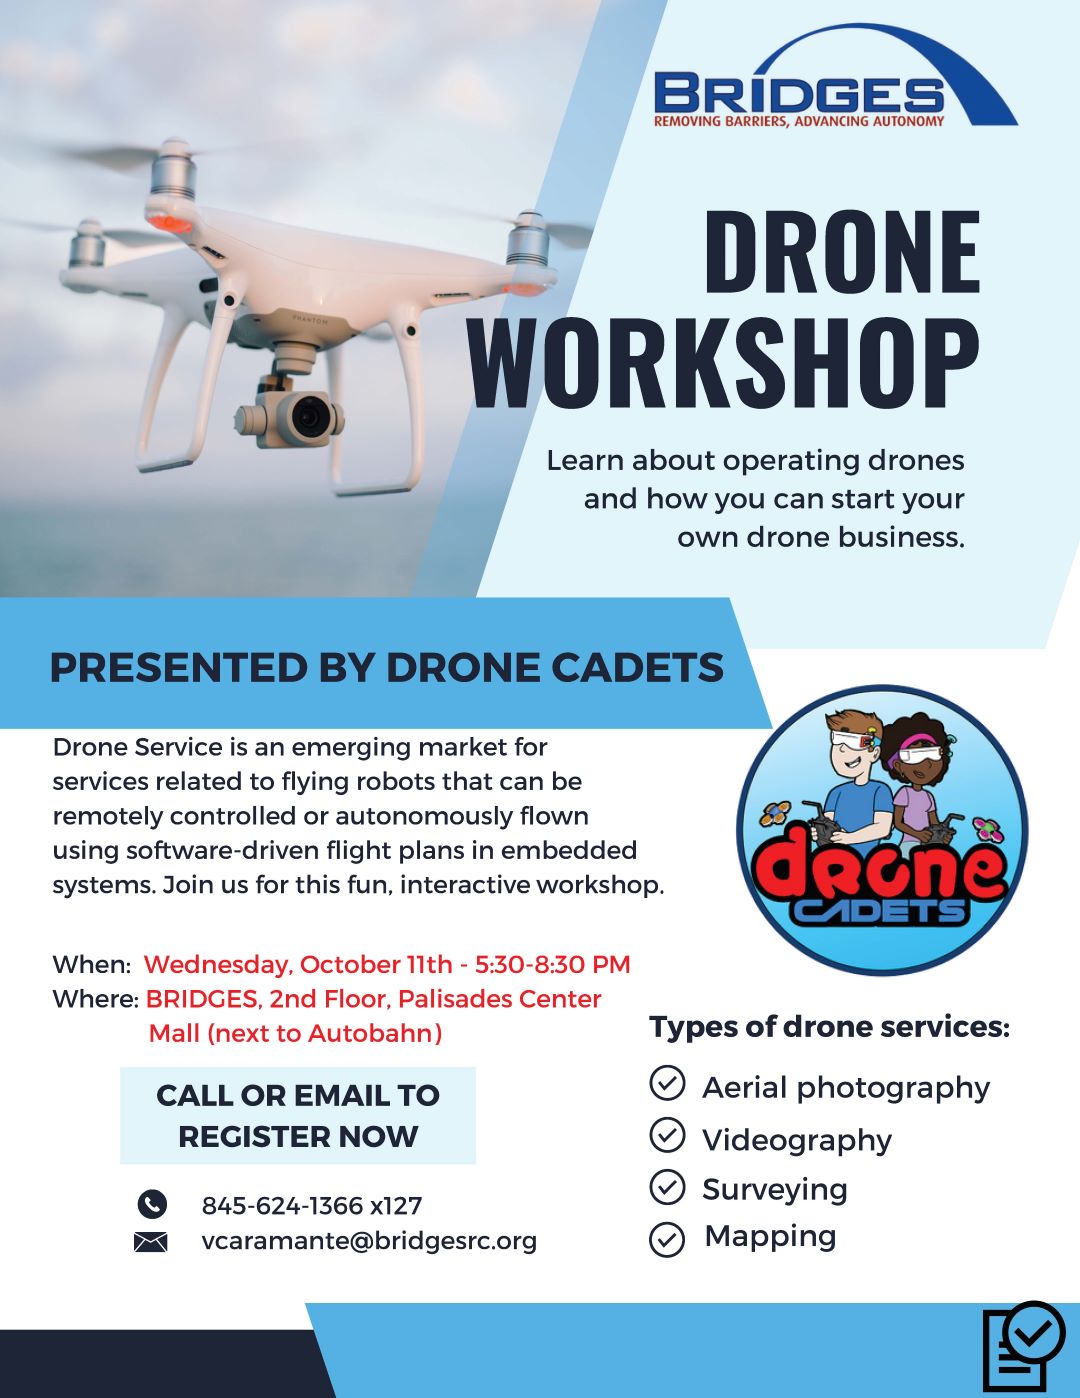 Bridges Drone Workshop Flyer. Learn about operating drones and how you can start your own drone business. Presented by Drone Cadets. Drone services is an emerging market for services related to flying robots that can be remotely controlled or autonomously flown using software driven flight plans in embedded systems. Join us for this fun, interactive workshop. Wednesday, October 11 from 5:30 to 8:30 PM. Located at Bridges on the second floor of the Palisades Center Mall, next to Autobahn. Types of drone services, aerial photography, videography, surveying, mapping. Call or email to register now, 845-624-1366 extension 127 VCaramante@BridgesRC.org.